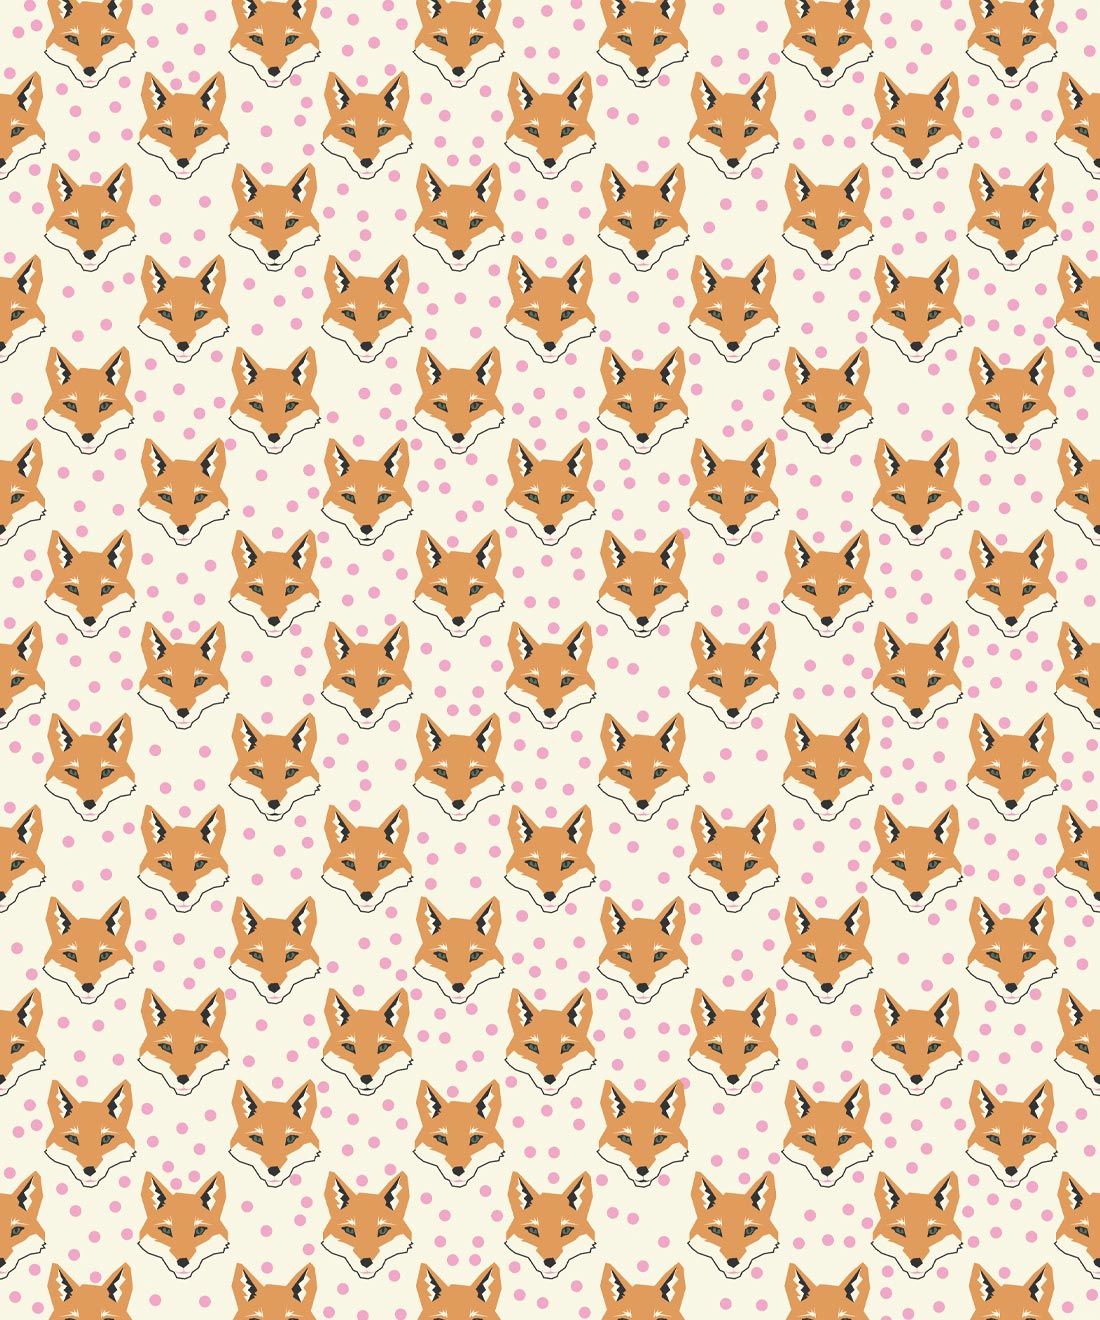 Foxes Wallpaper • Animal • Grey • Swatch